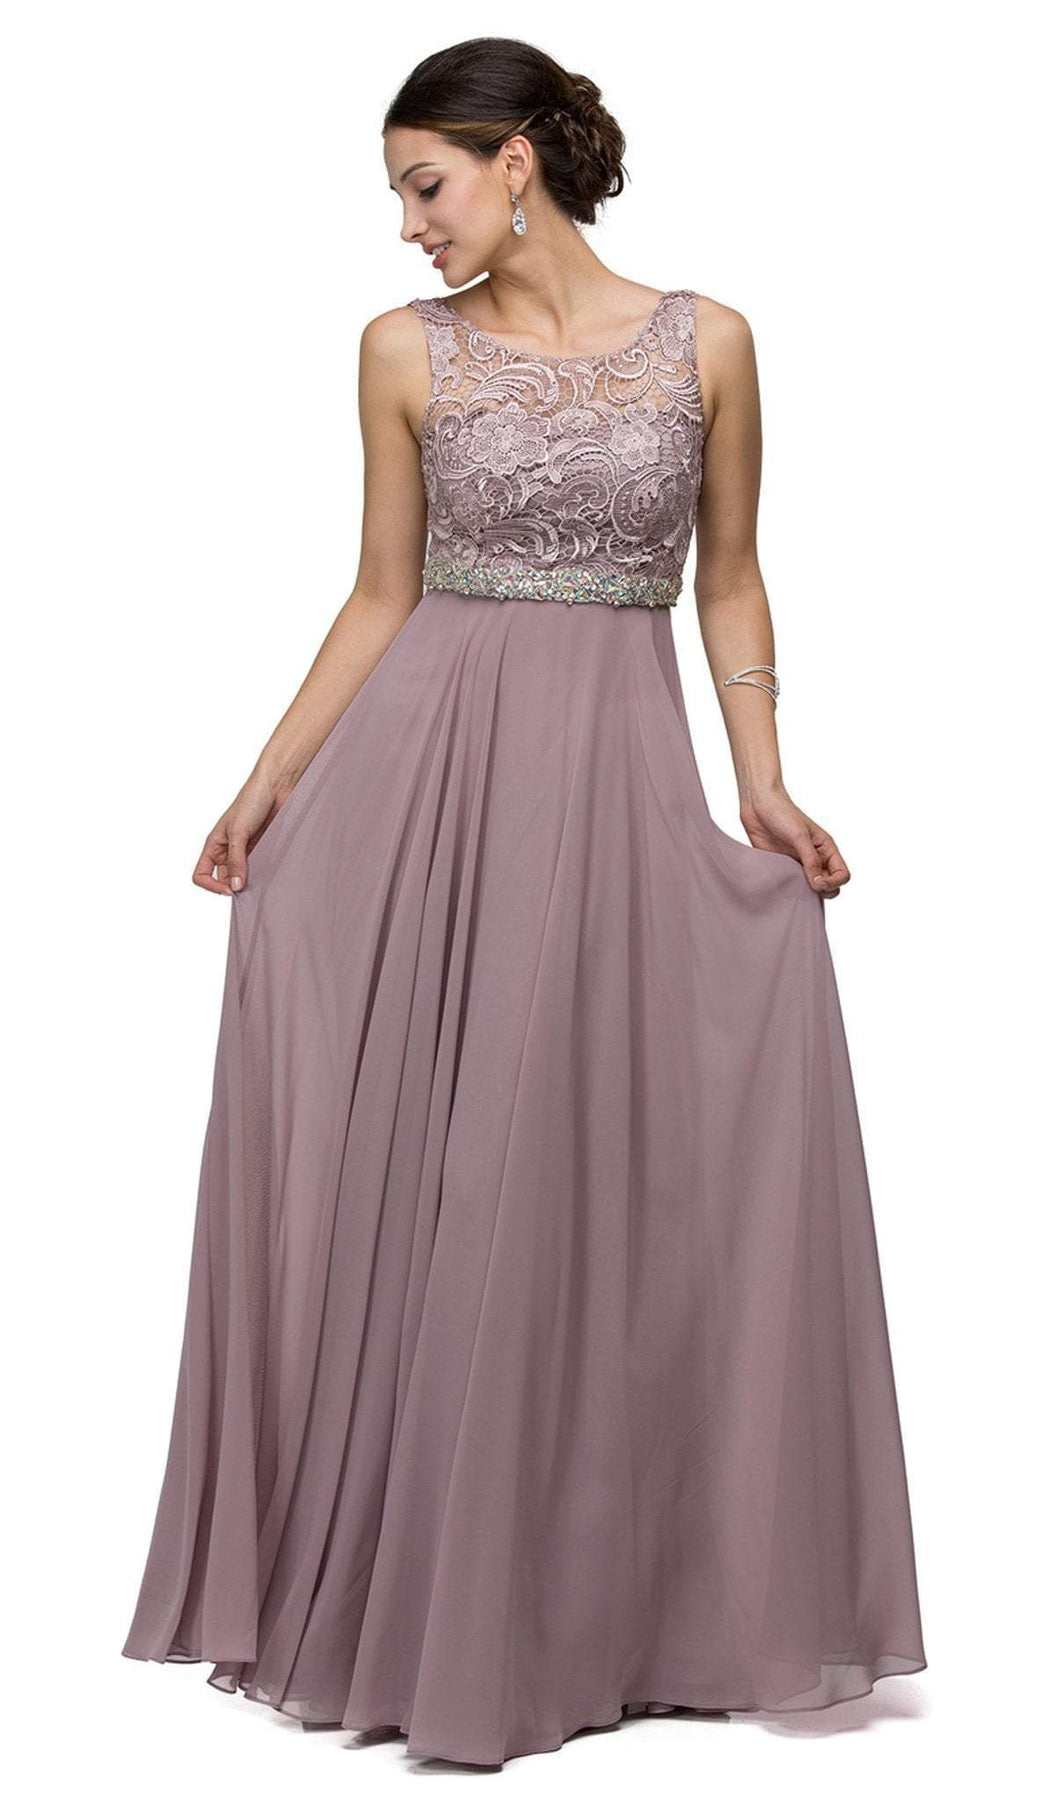 Dancing Queen - 9325 Embroidered Lace Scoop Neck Chiffon Prom Dress Prom Dresses XS / Mocha